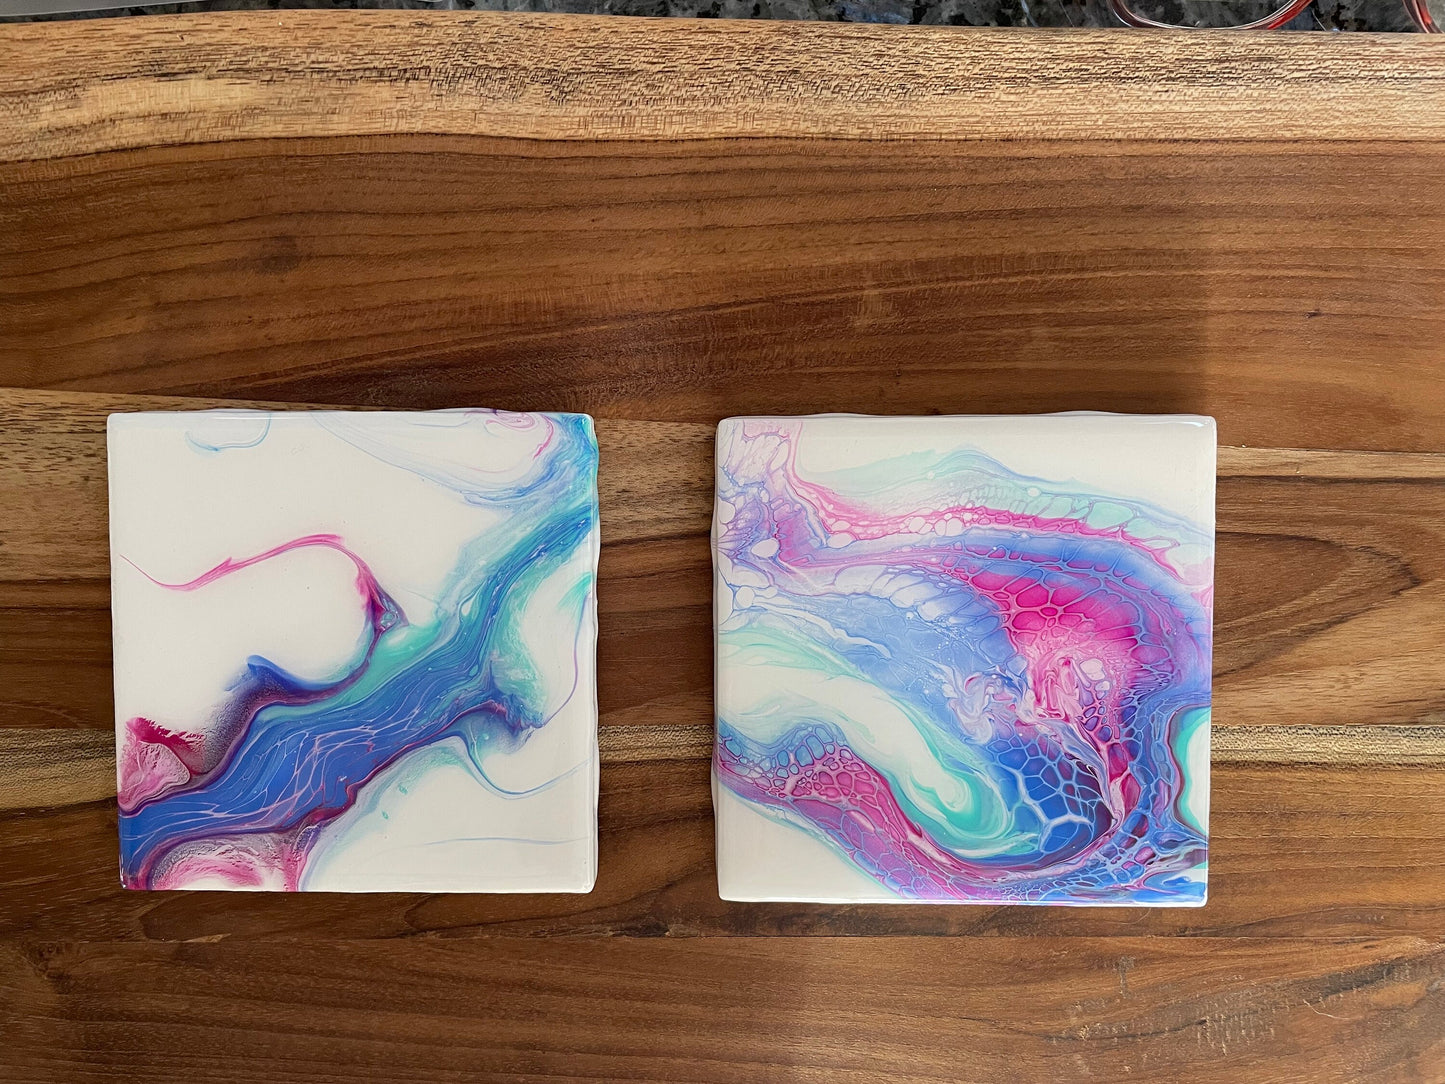 Square Ceramic Coaster Set of 2 With Glossy Heat Resistant Epoxy, Abstract Acrylic Paint Pour Style